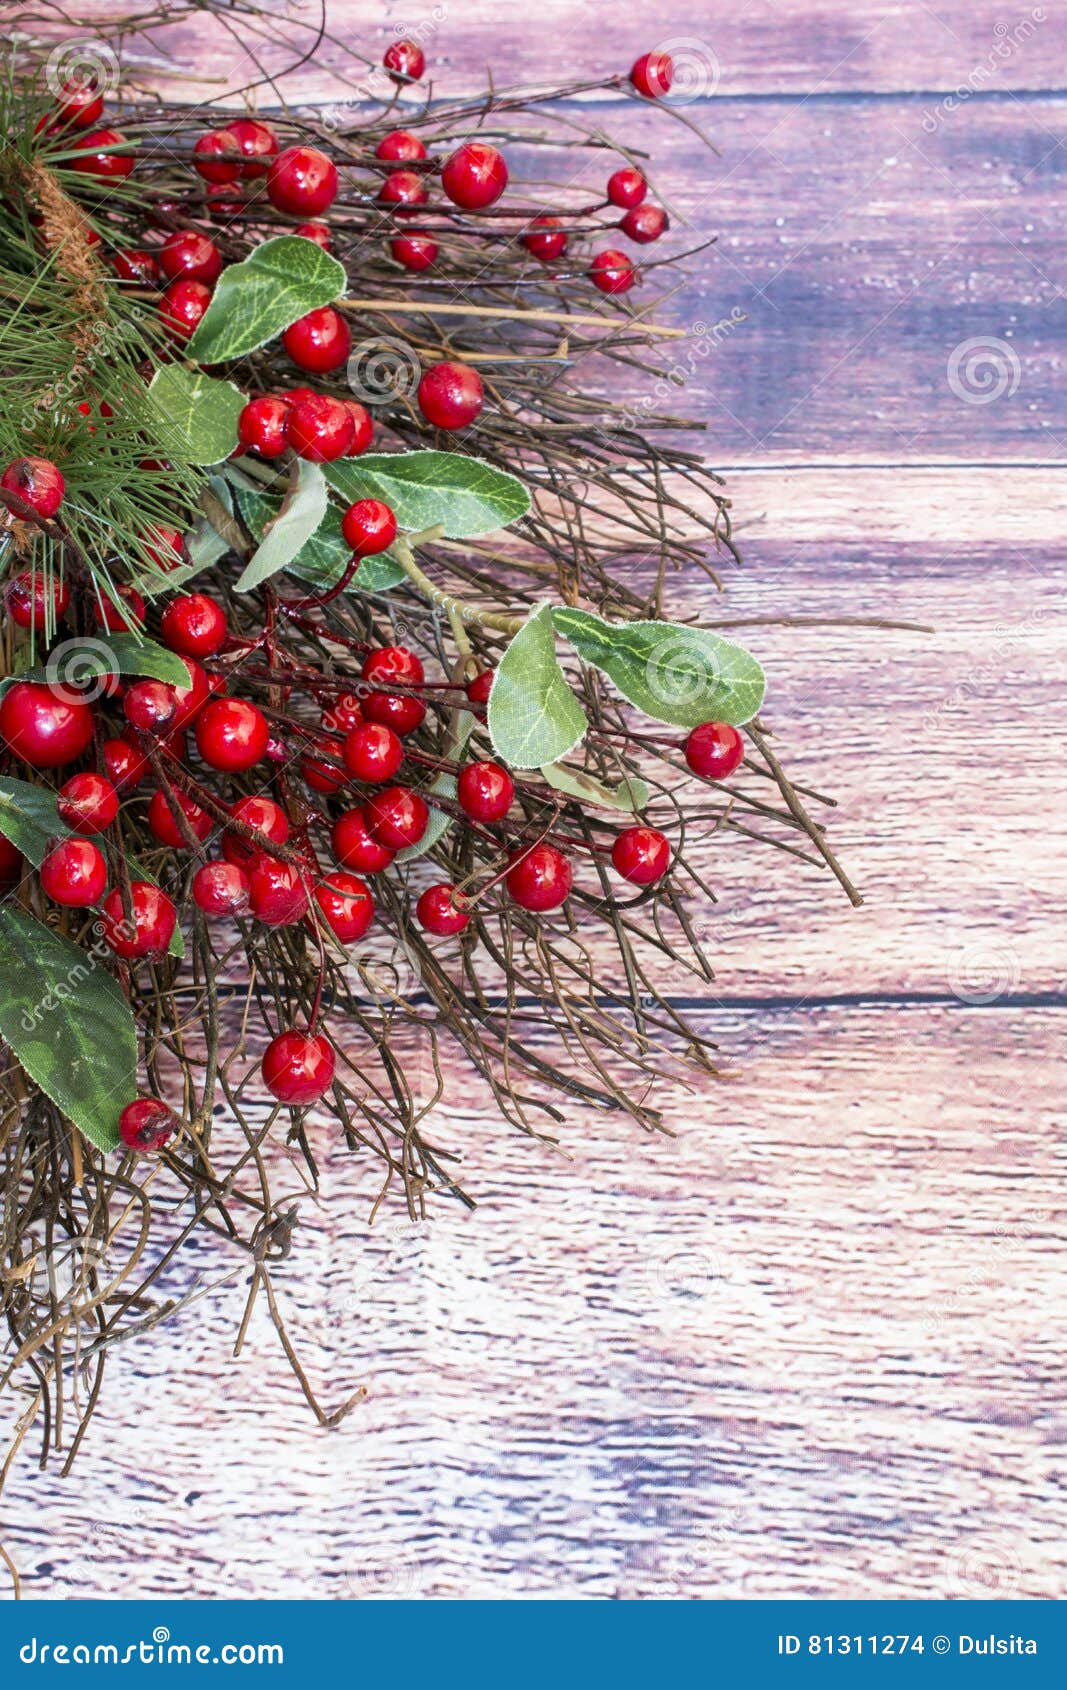 Boughs of holly stock photo. Image of adornment, berry - 81311274